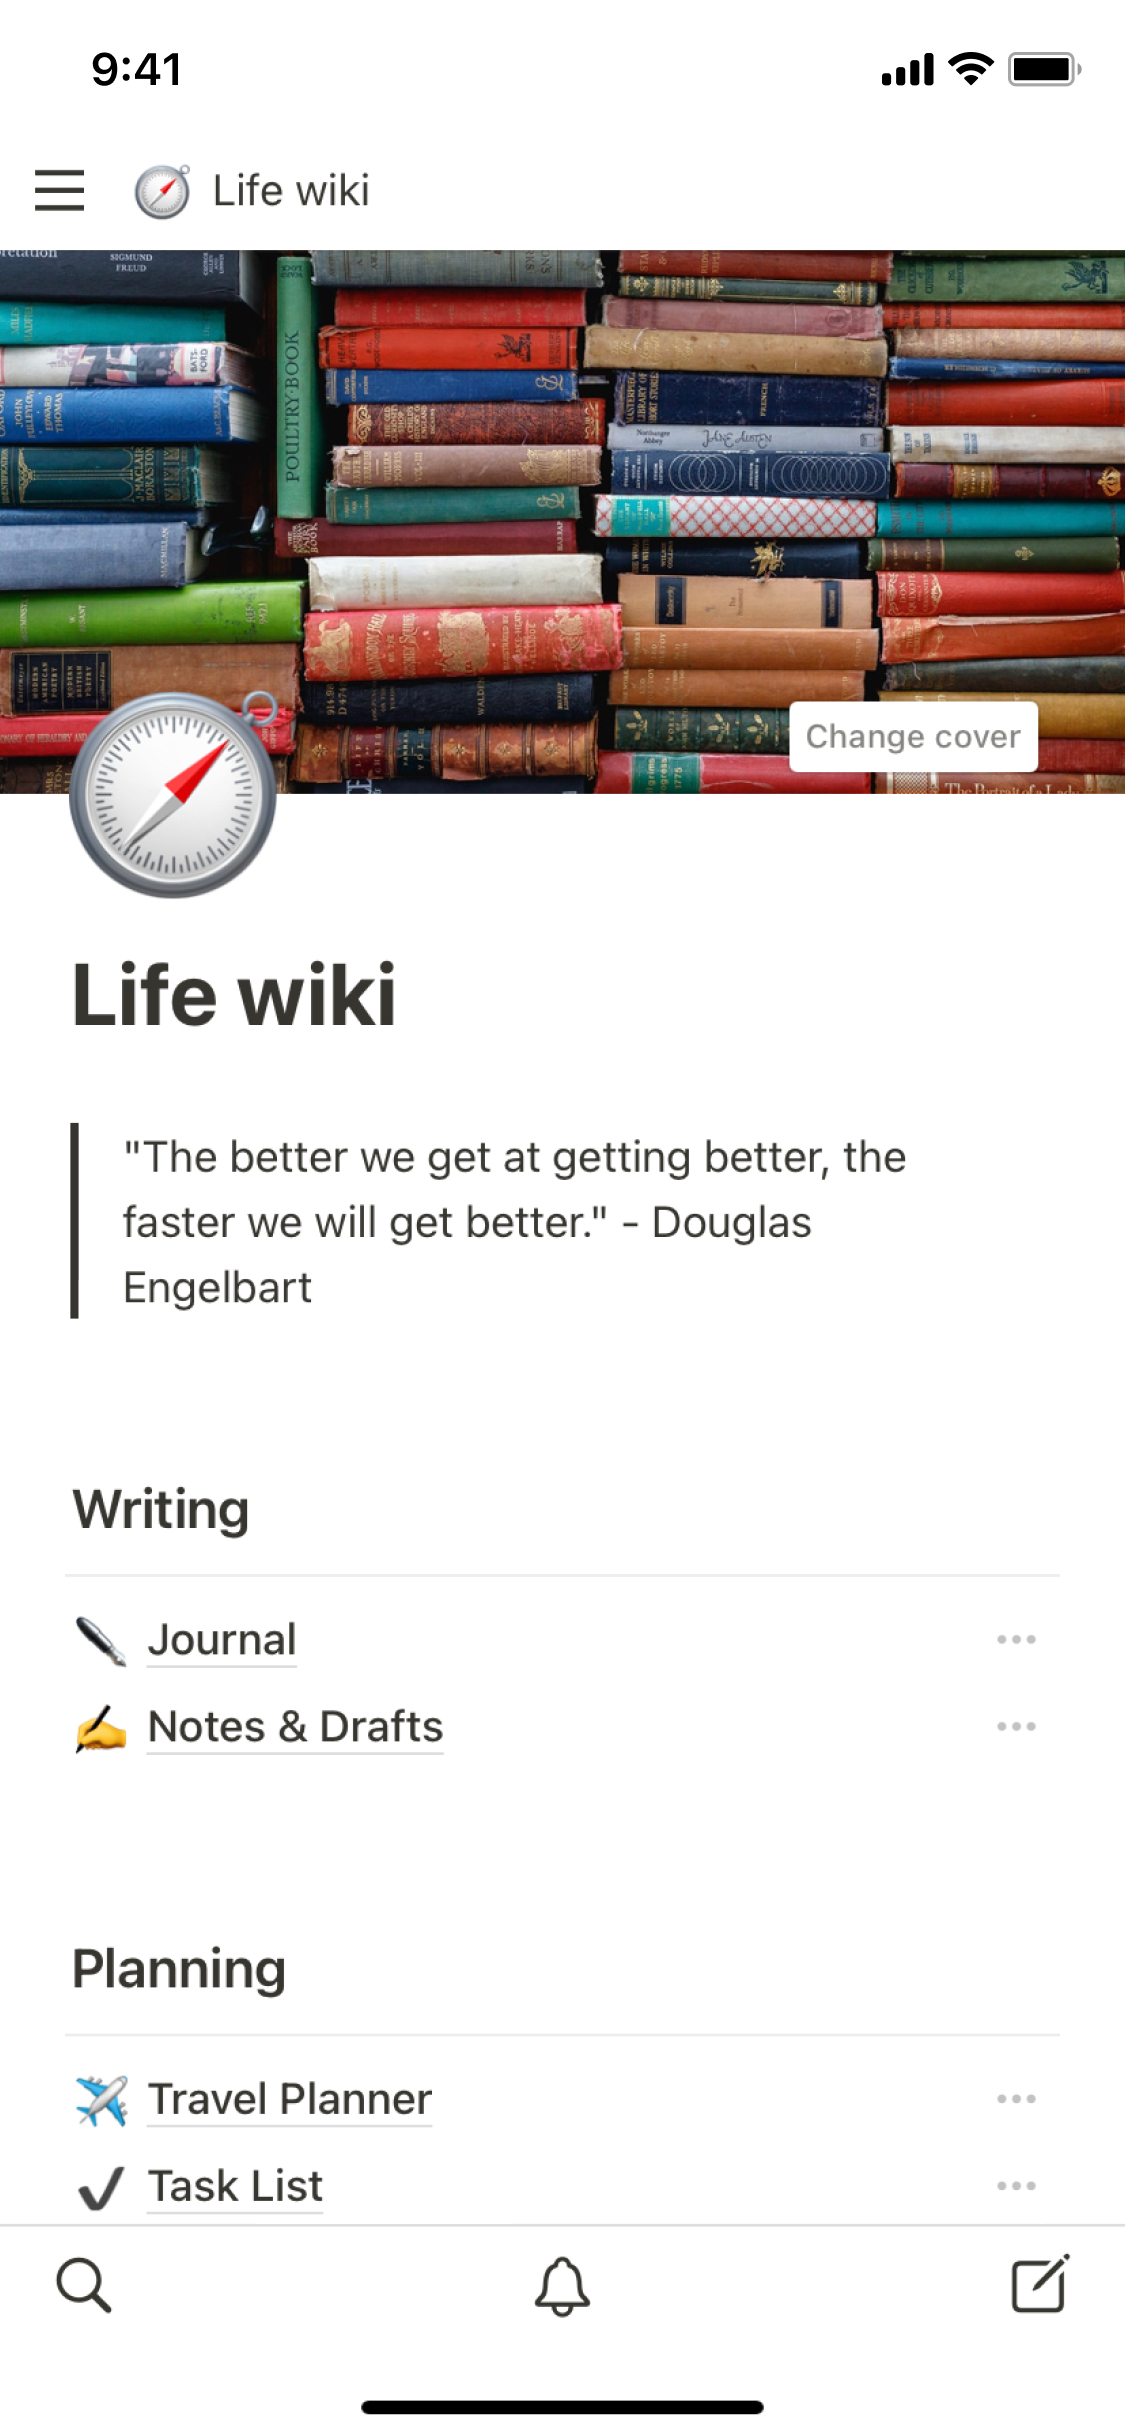 The mobile image for the Life wiki template